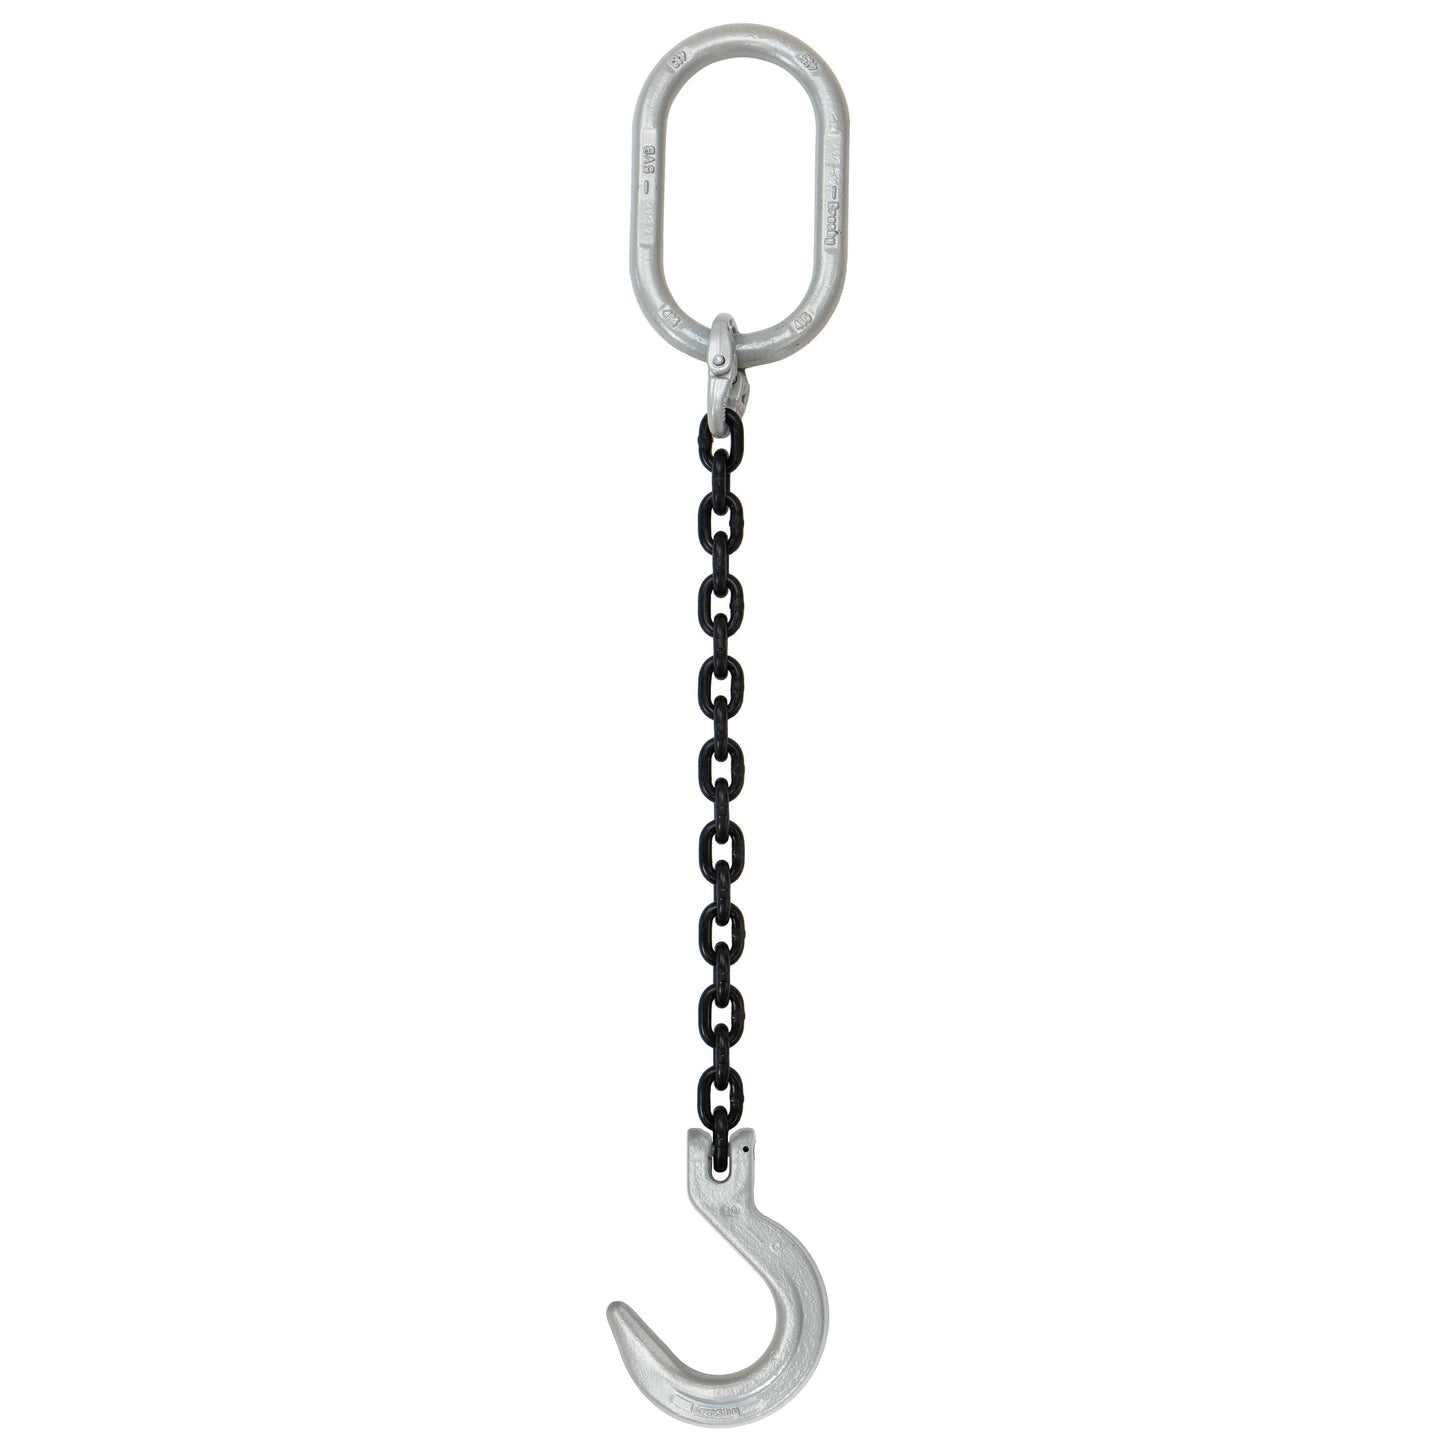 12 inch x 6 foot Domestic Single Leg Chain Sling w Crosby Foundry Hook Grade 100 image 1 of 2